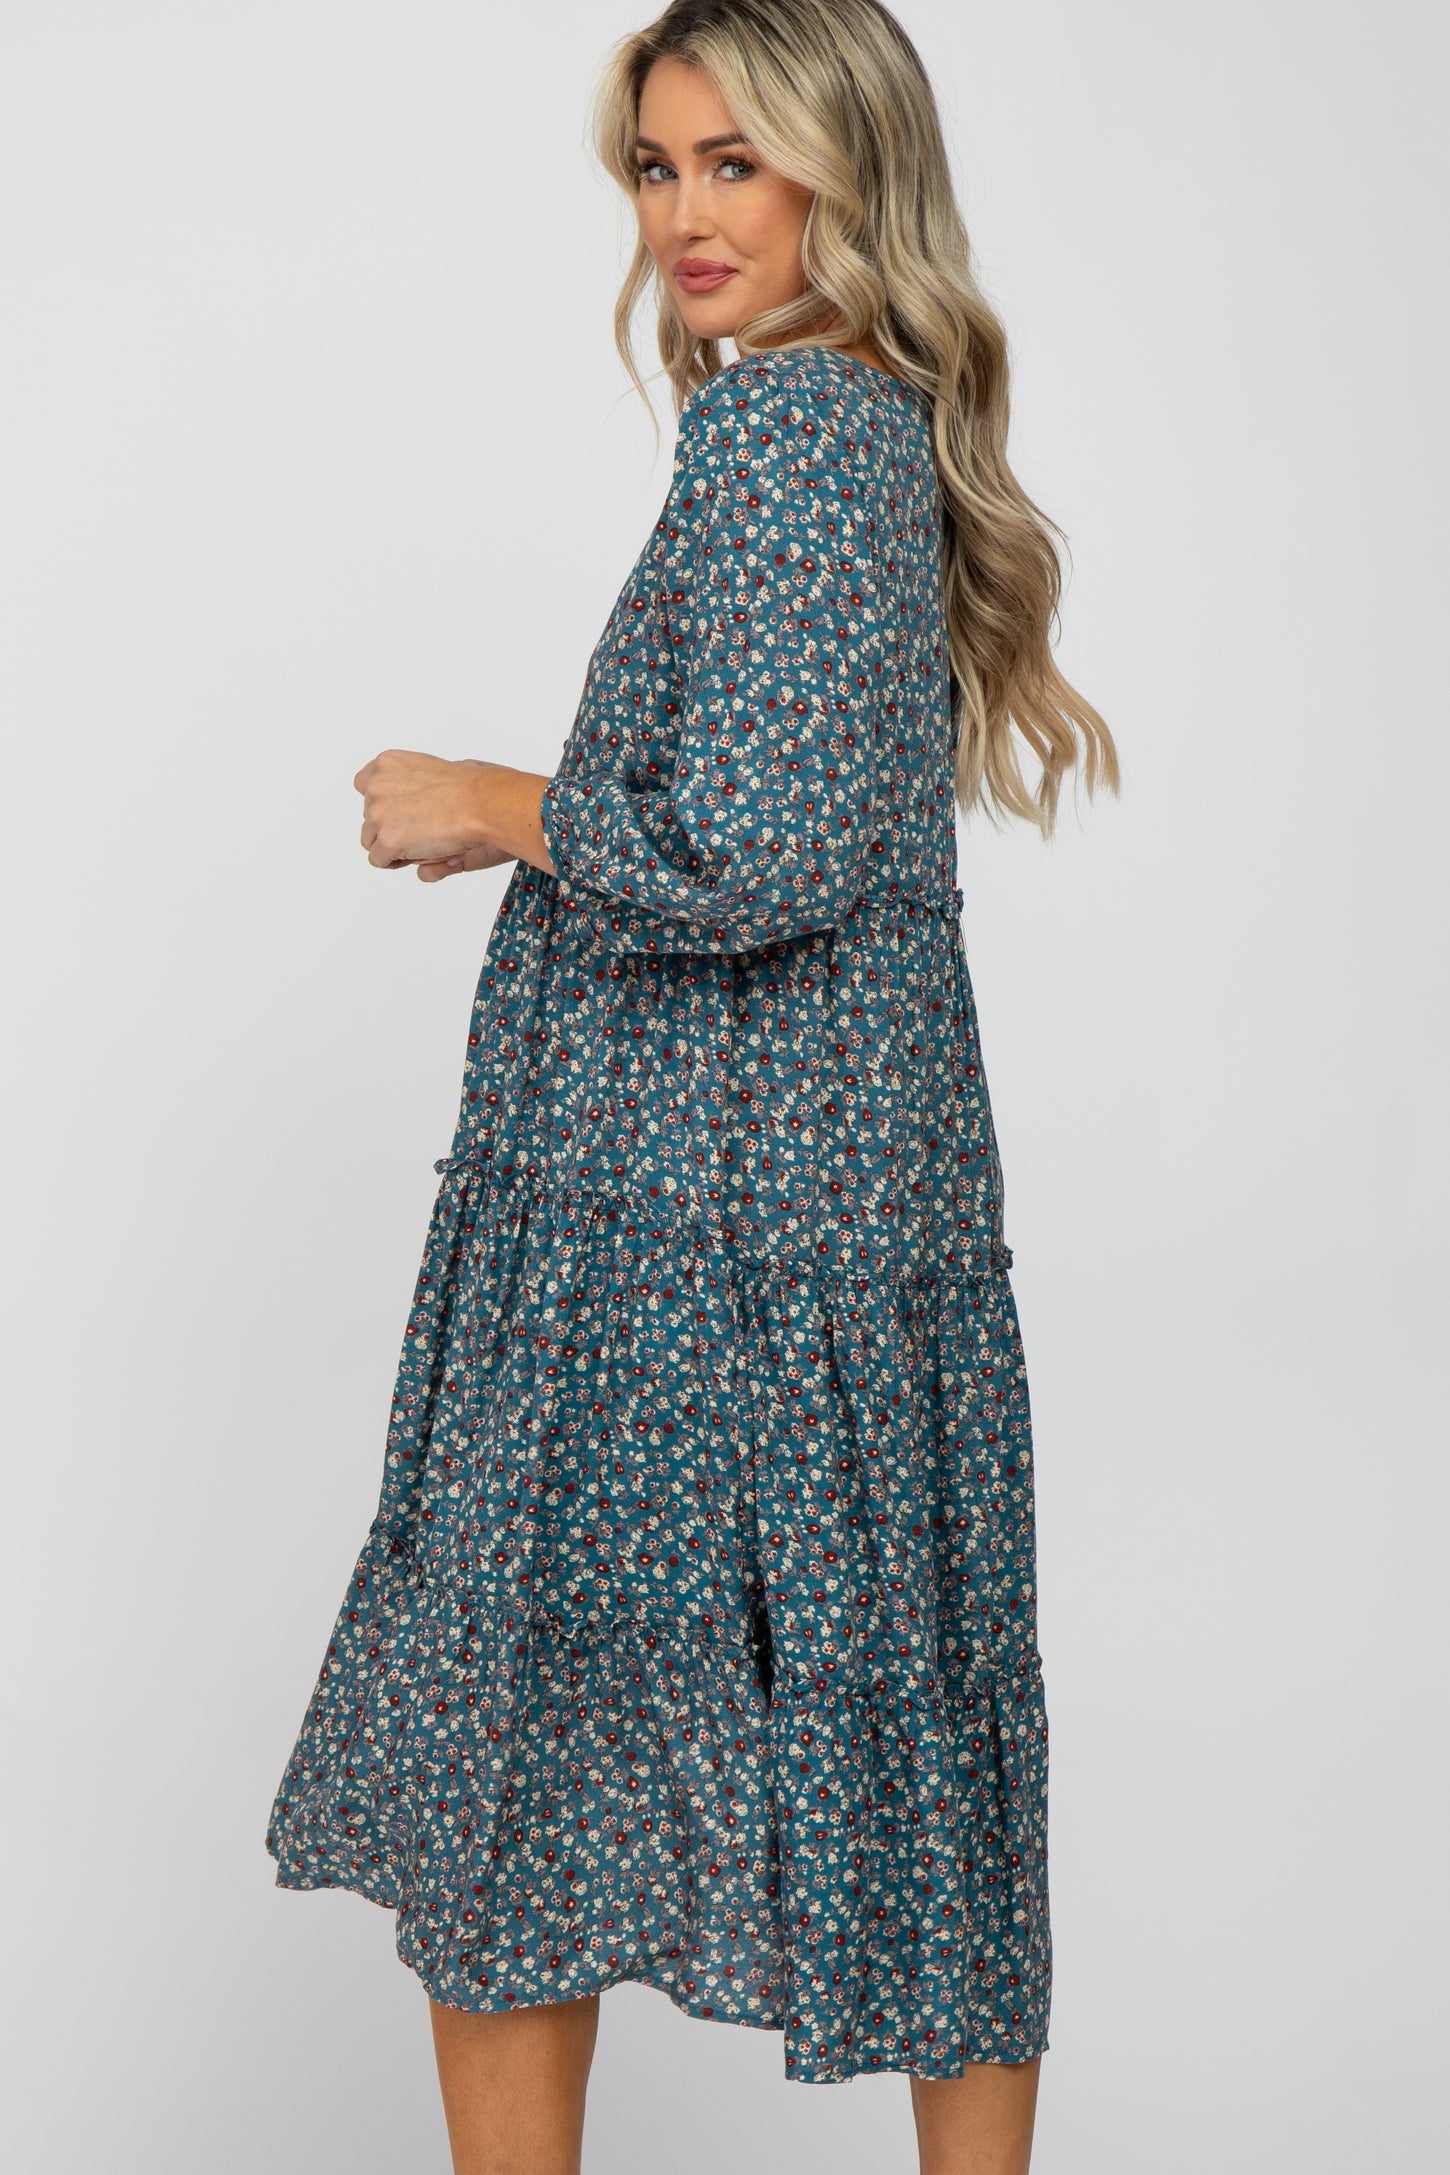 Blue Floral Button Front Tiered Ruffle Maternity Midi Dress– PinkBlush